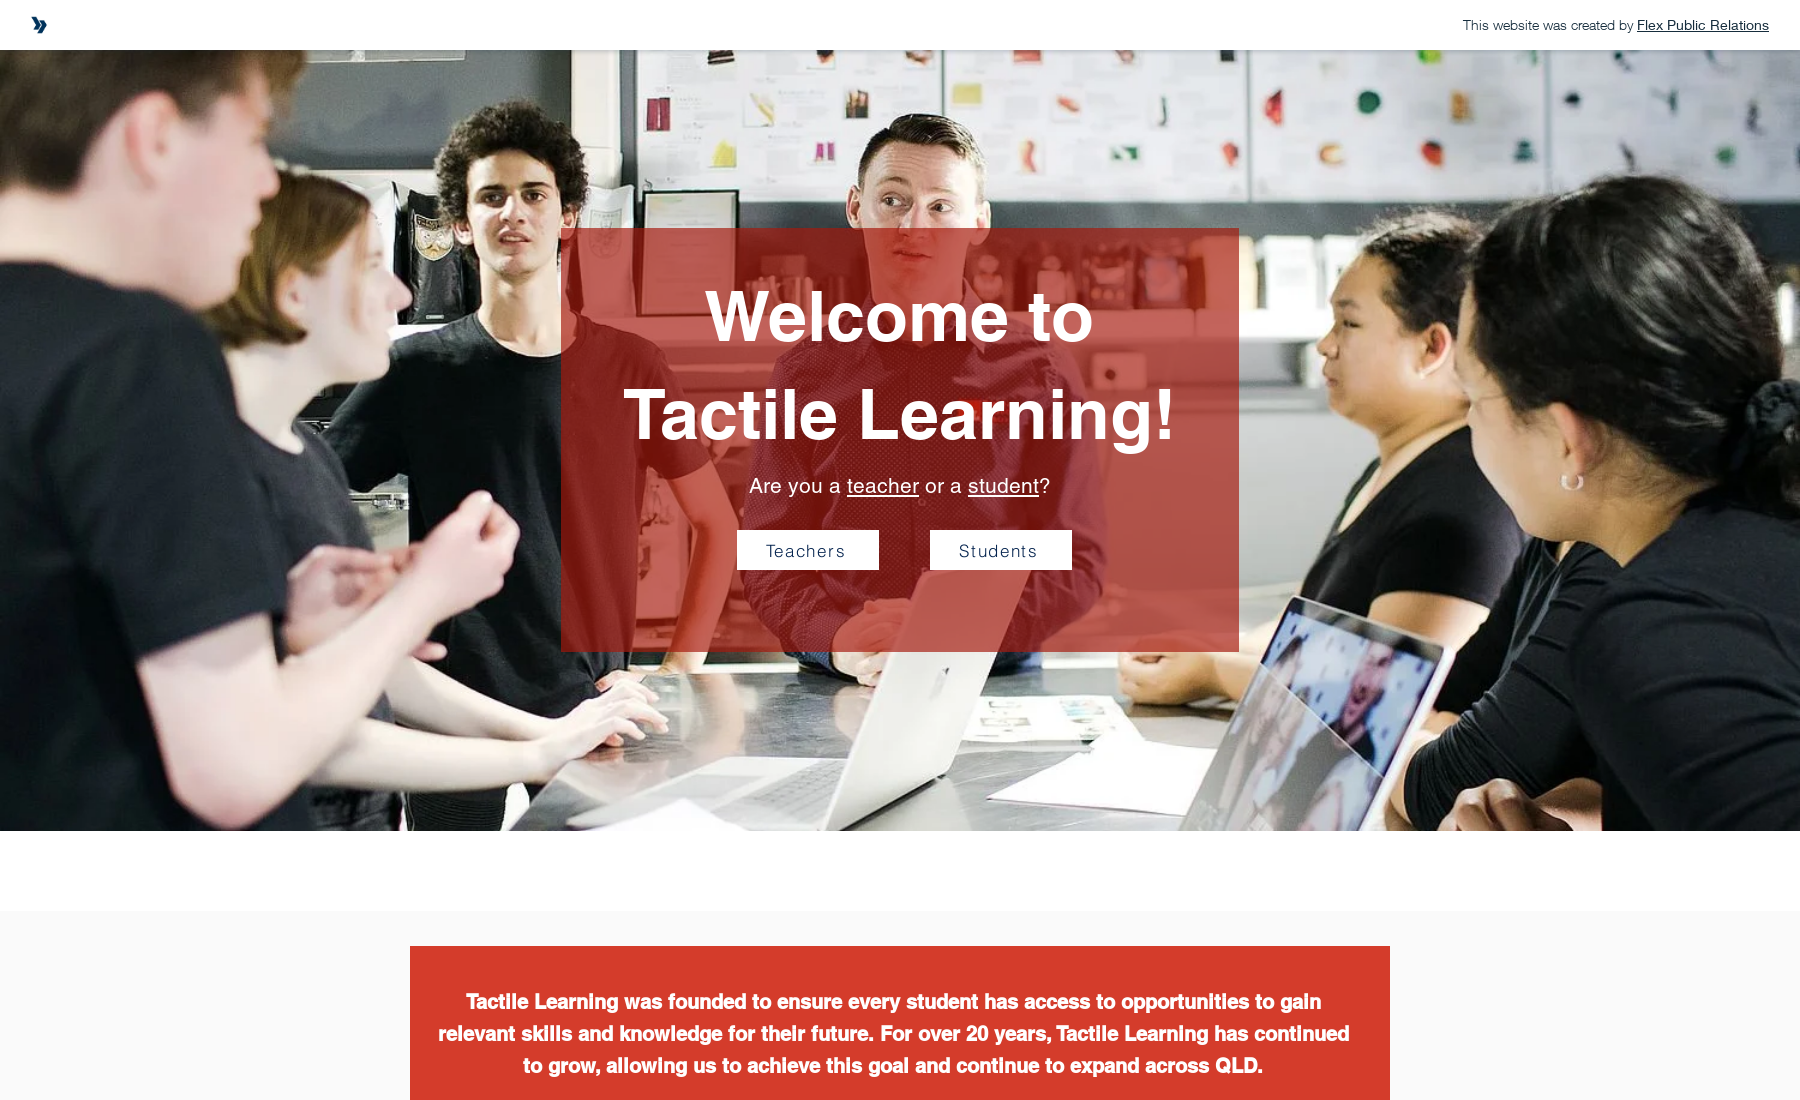 Tactile Learning: Tactile Learning is a training organisation for students in high schools across Brisbane, Australia. This site has an online booking system, animated features and automation.